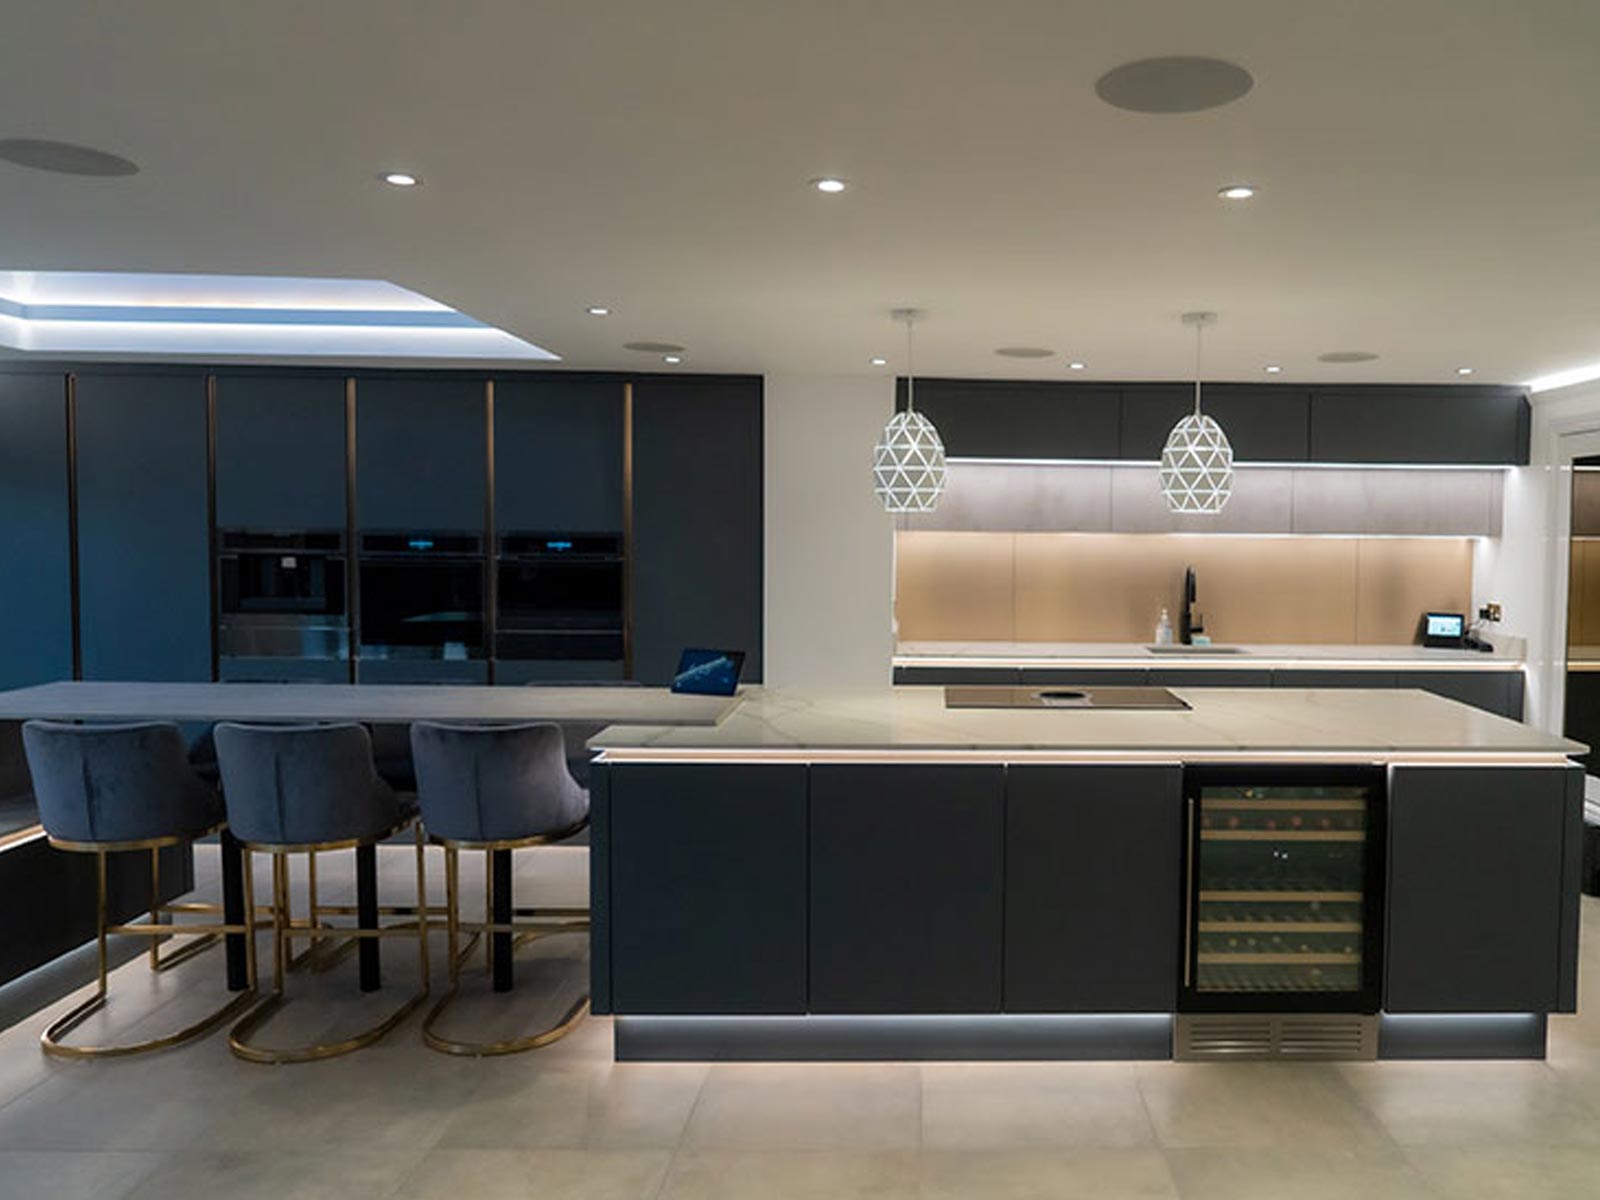 Luxury kitchen with origami lightshades between kitchen wall cabinets